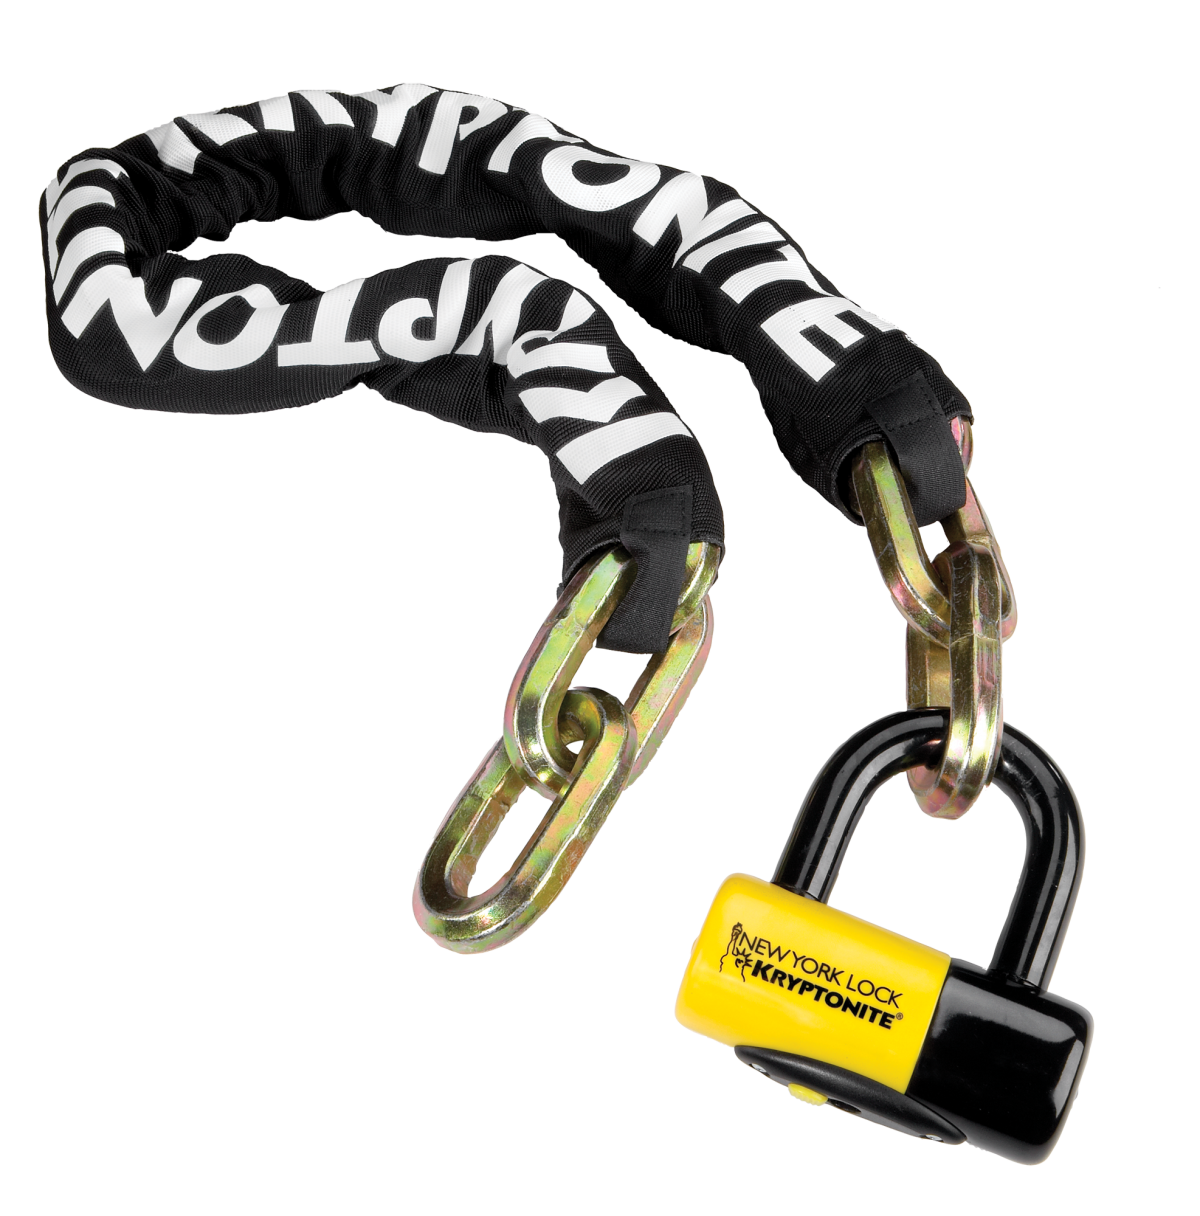 Kryptonite New York Fahgettaboudit Chain Lock Review - Femme Cyclist